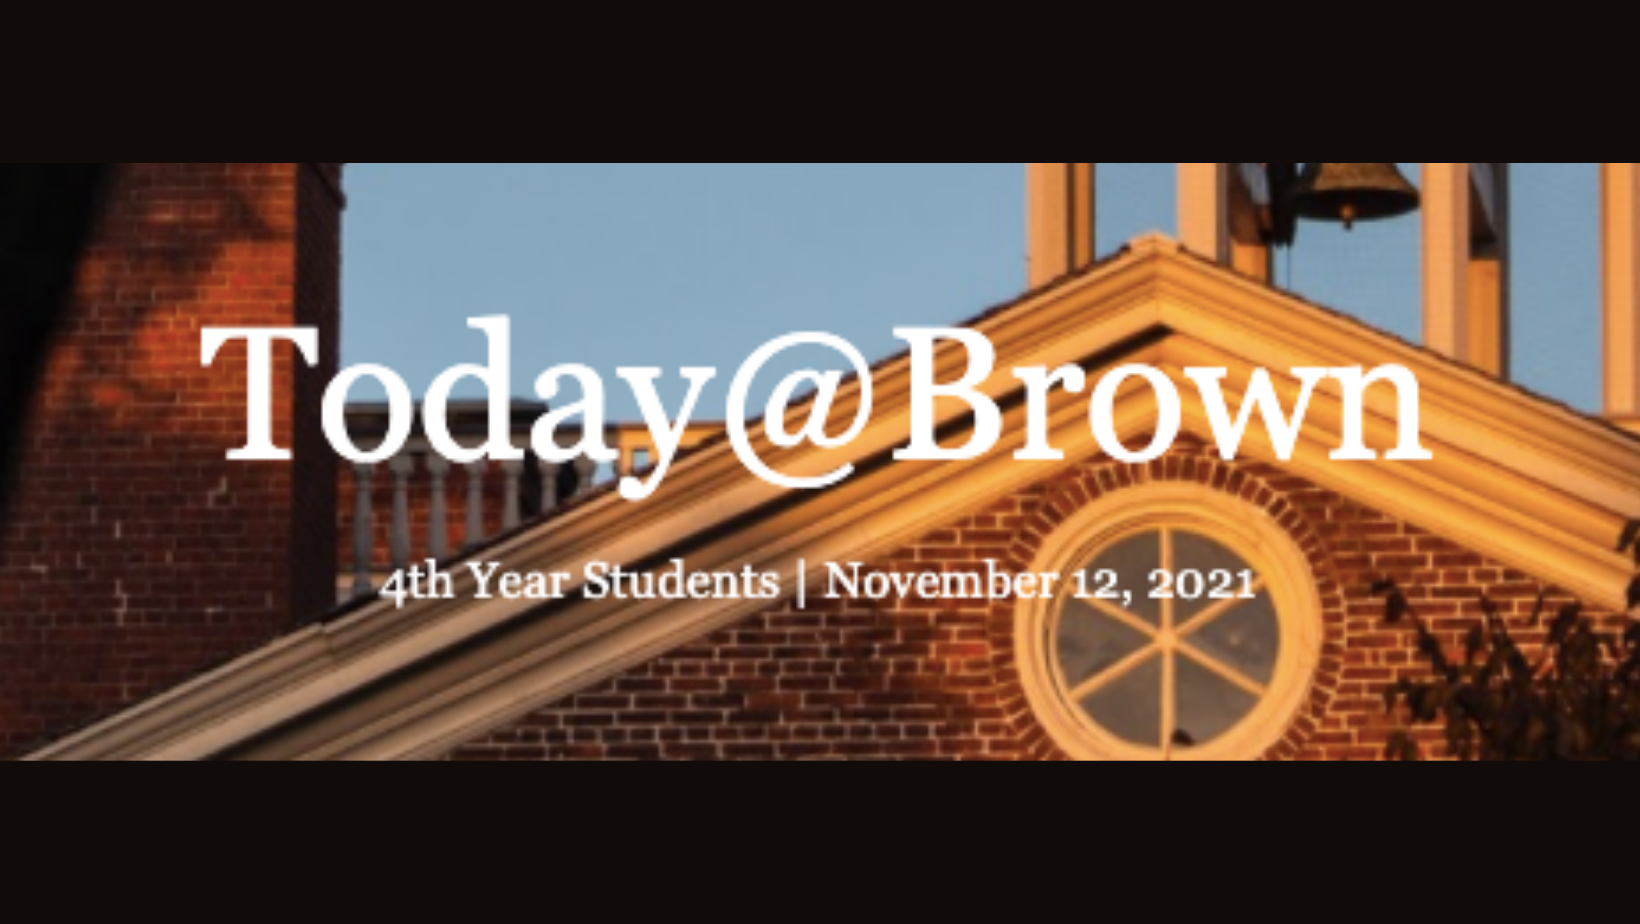 The ABCs of Today@Brown